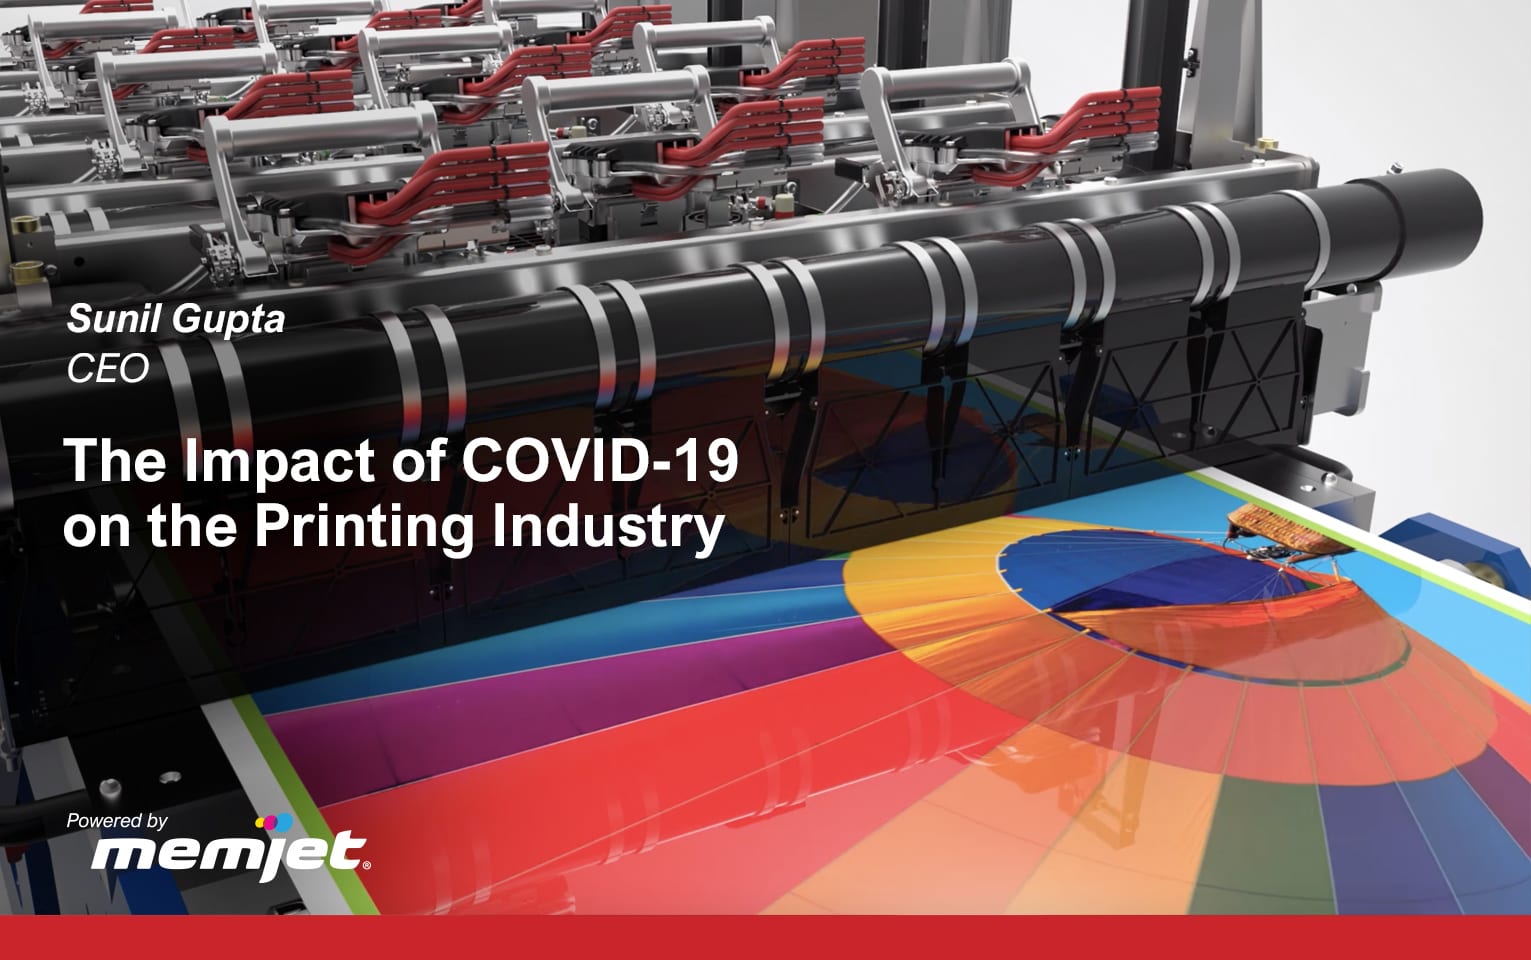 The Impact of COVID-19 on the Printing Industry